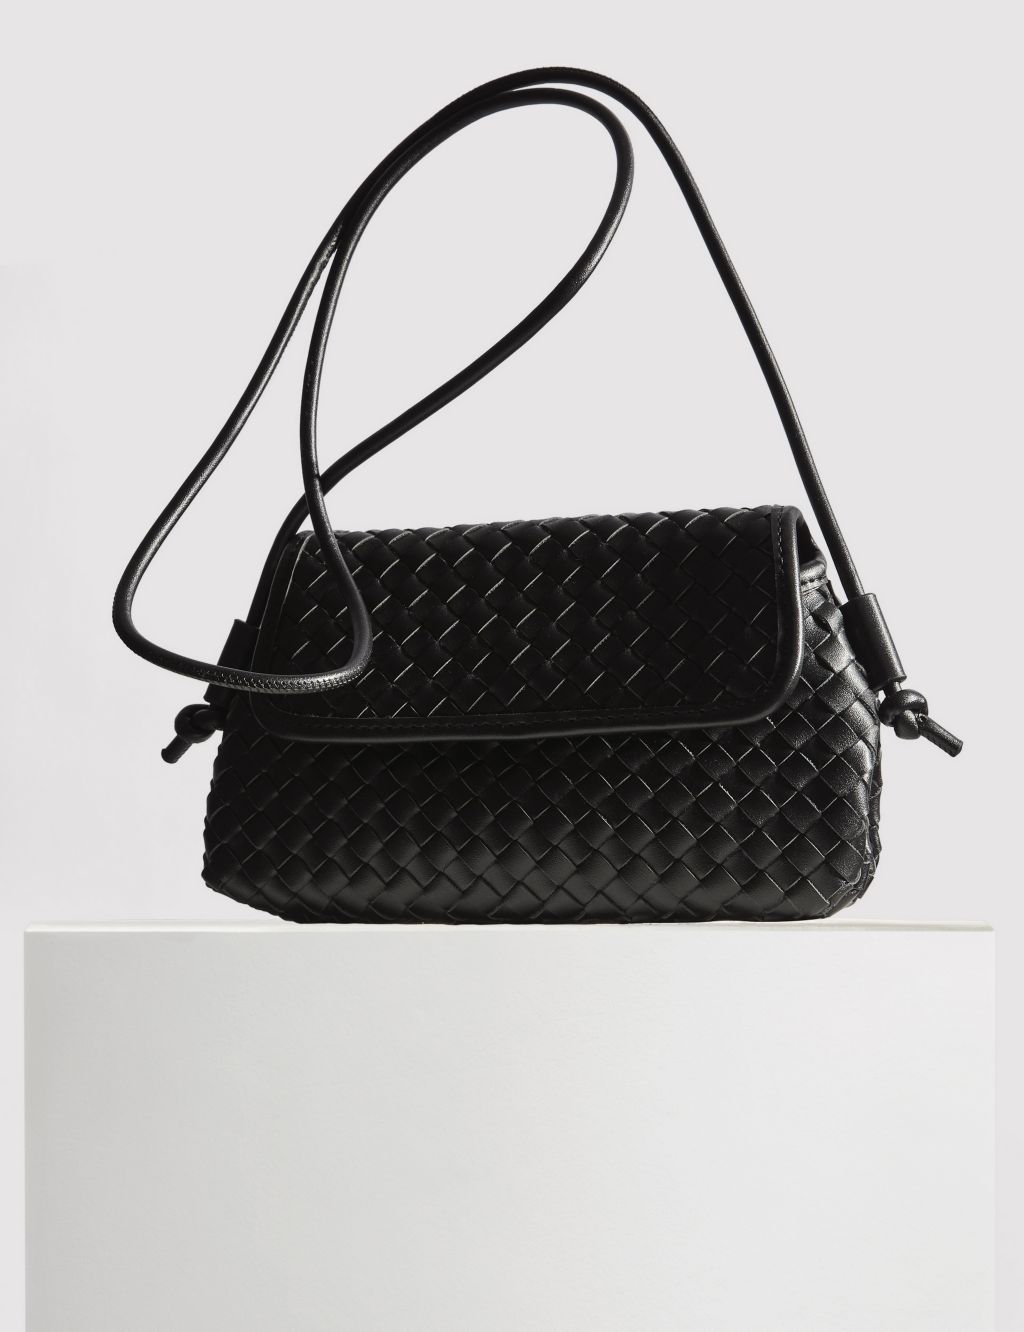 Faux Leather Woven Cross Body Bag image 1